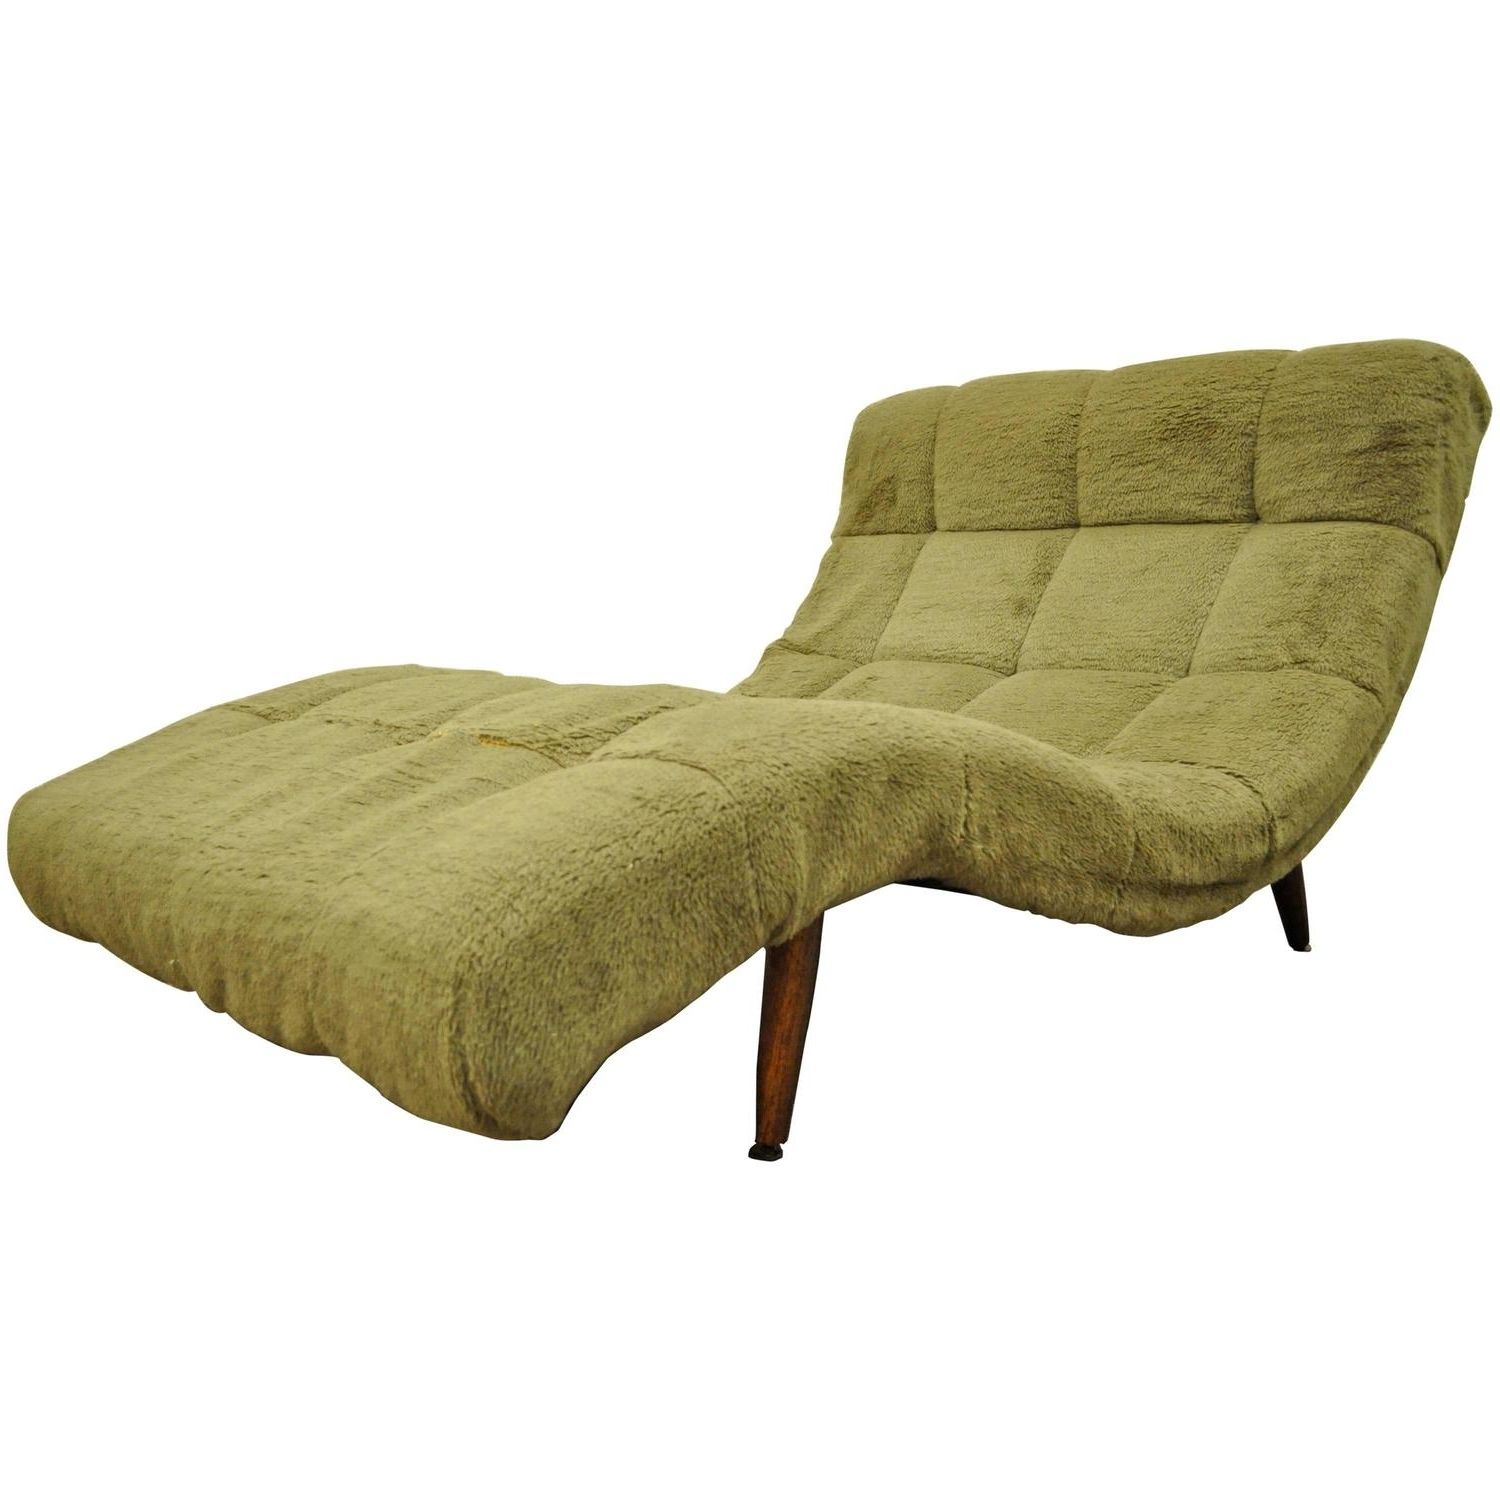 Fashionable Midcentury Modern Double Wide Wave Chaise Lounge In The Style Of Within Mid Century Chaise Lounges (Photo 1 of 15)